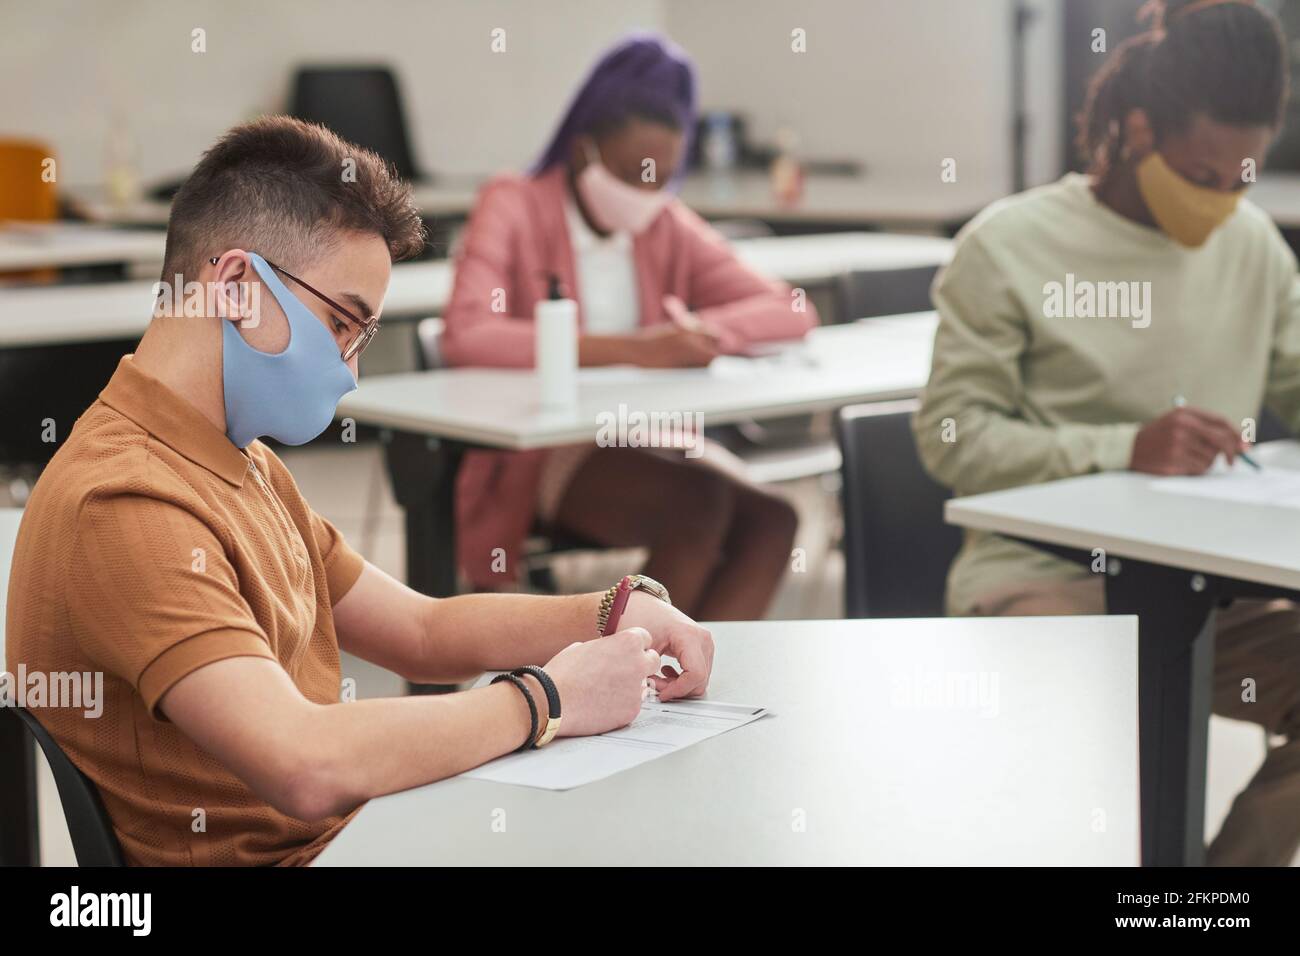 Side view portrait of young man wearing mask while taking test or exam in school with diverse group of people, copy space Stock Photo